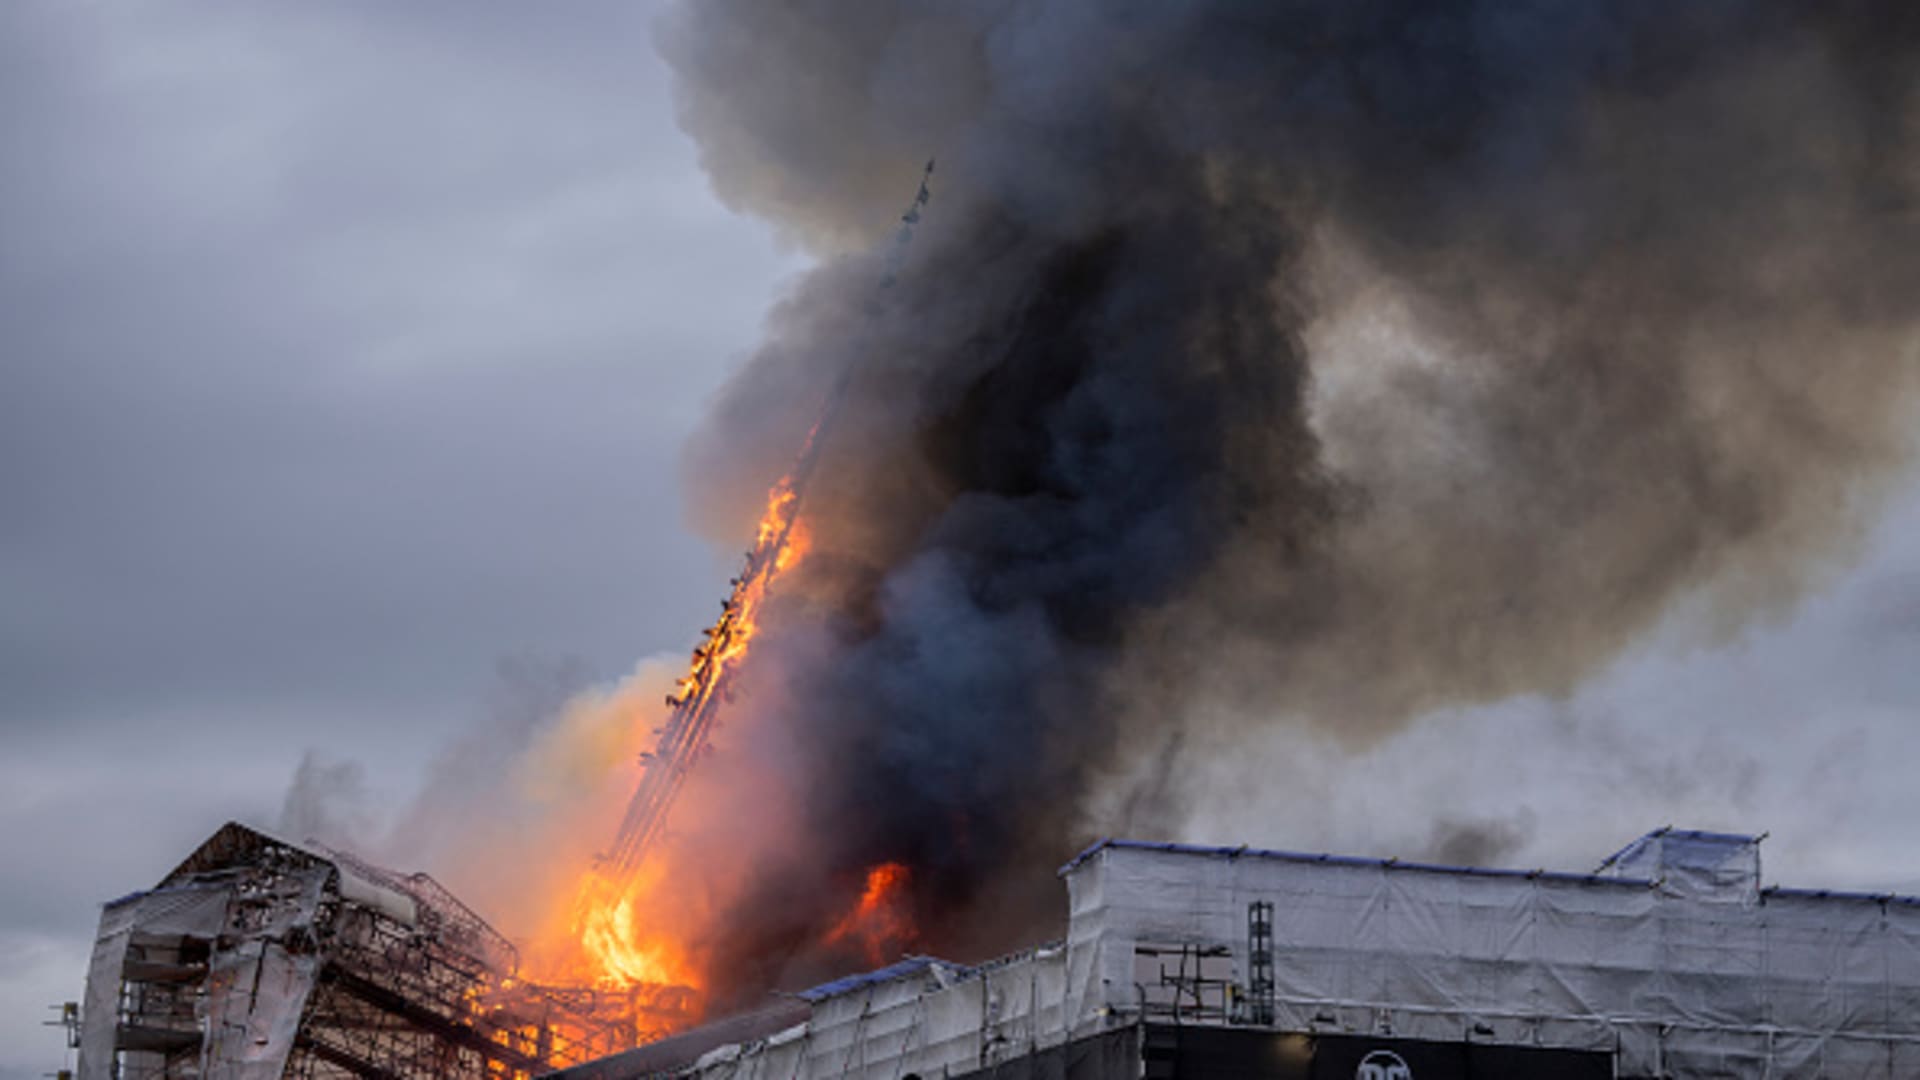 Fire breaks out at Denmark’s historic Stock Exchange building